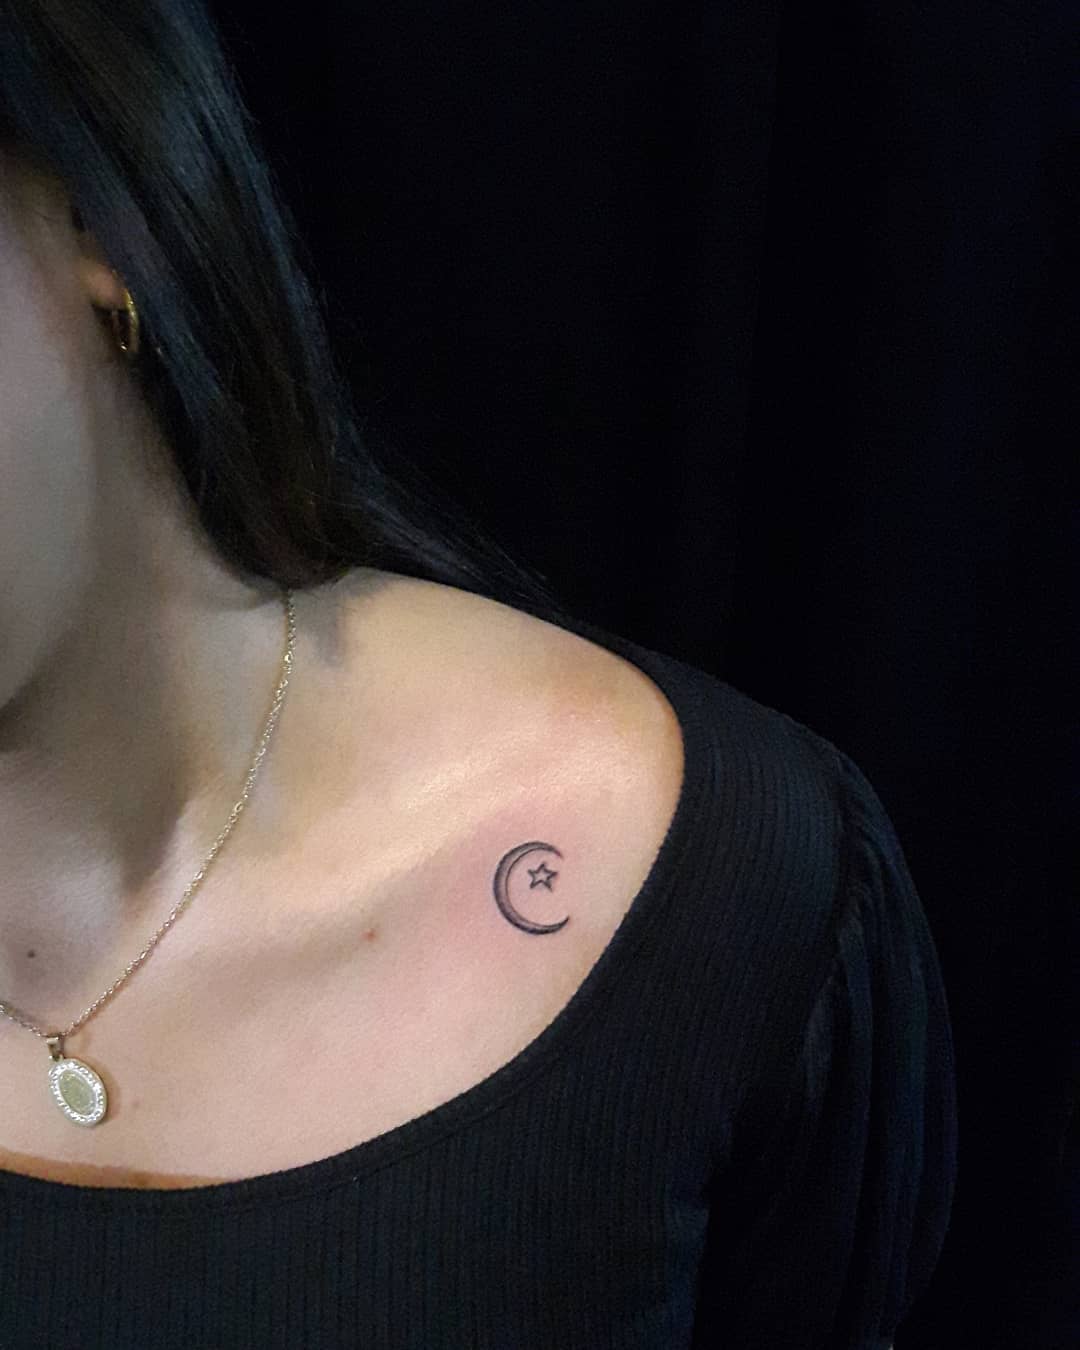 Star and moon tattoo